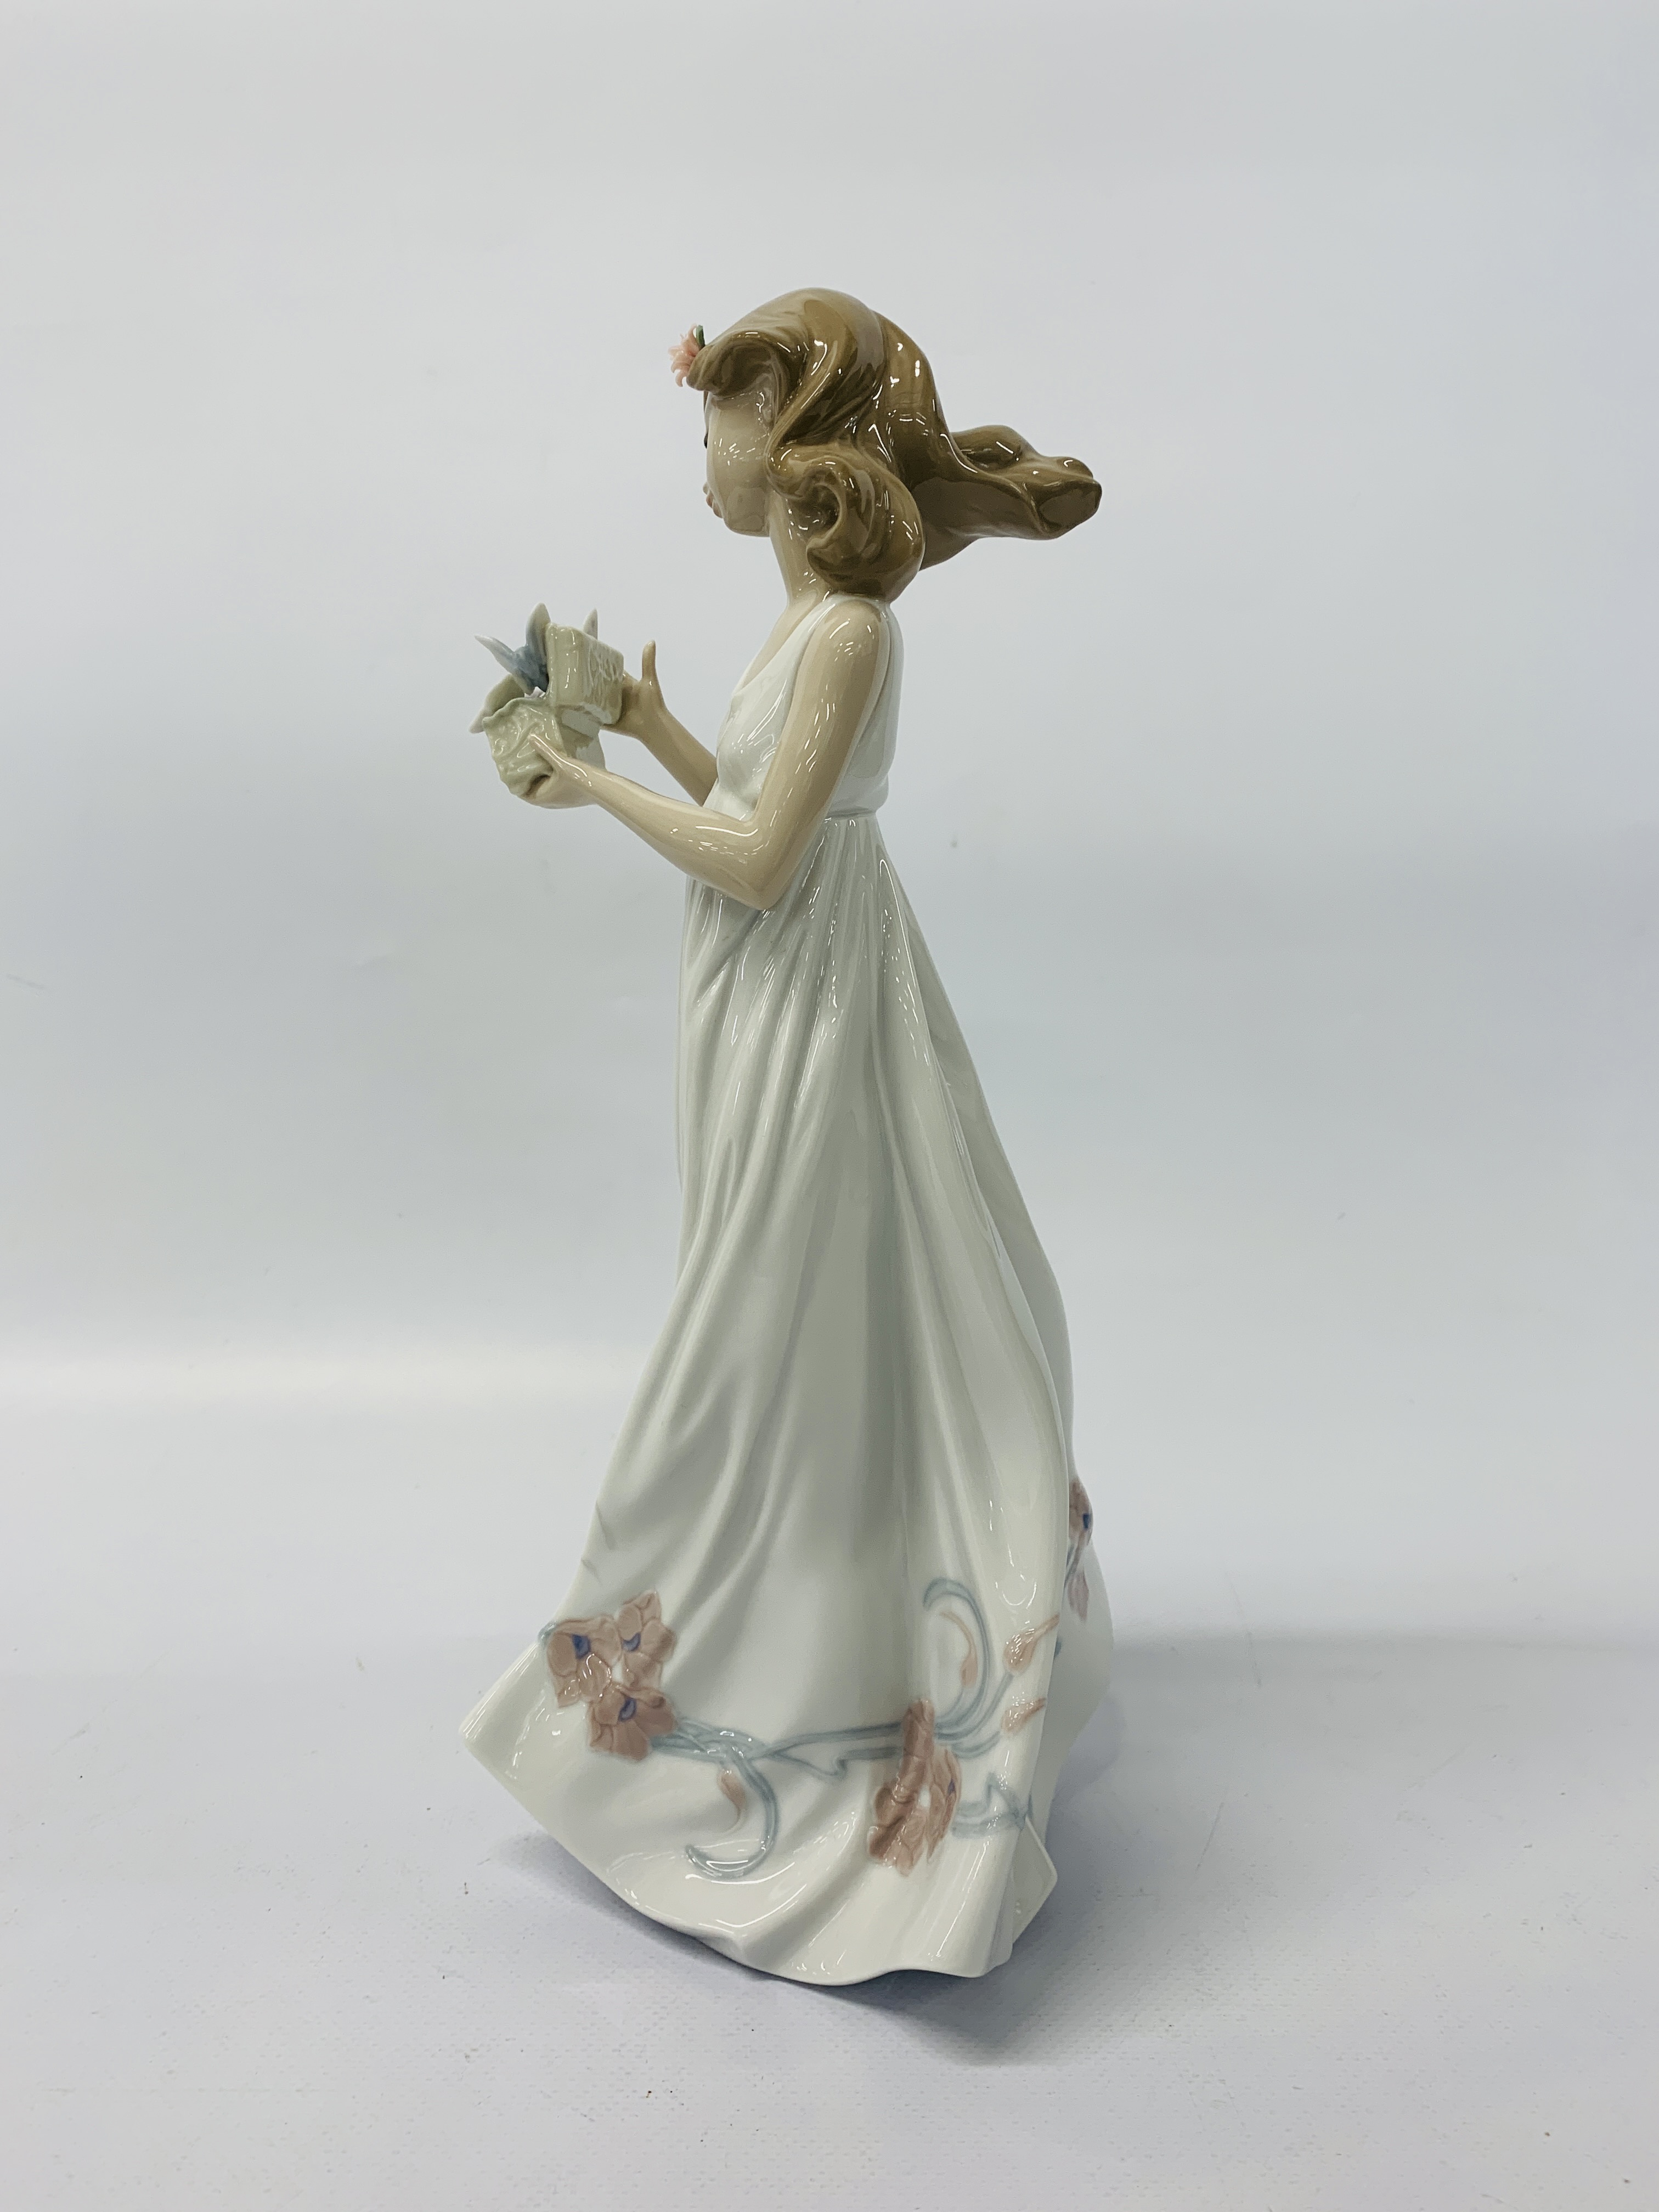 LLADRO FIGURINE 6777 "BUTTERFLY TREASURES" 32 CM. - Image 2 of 7